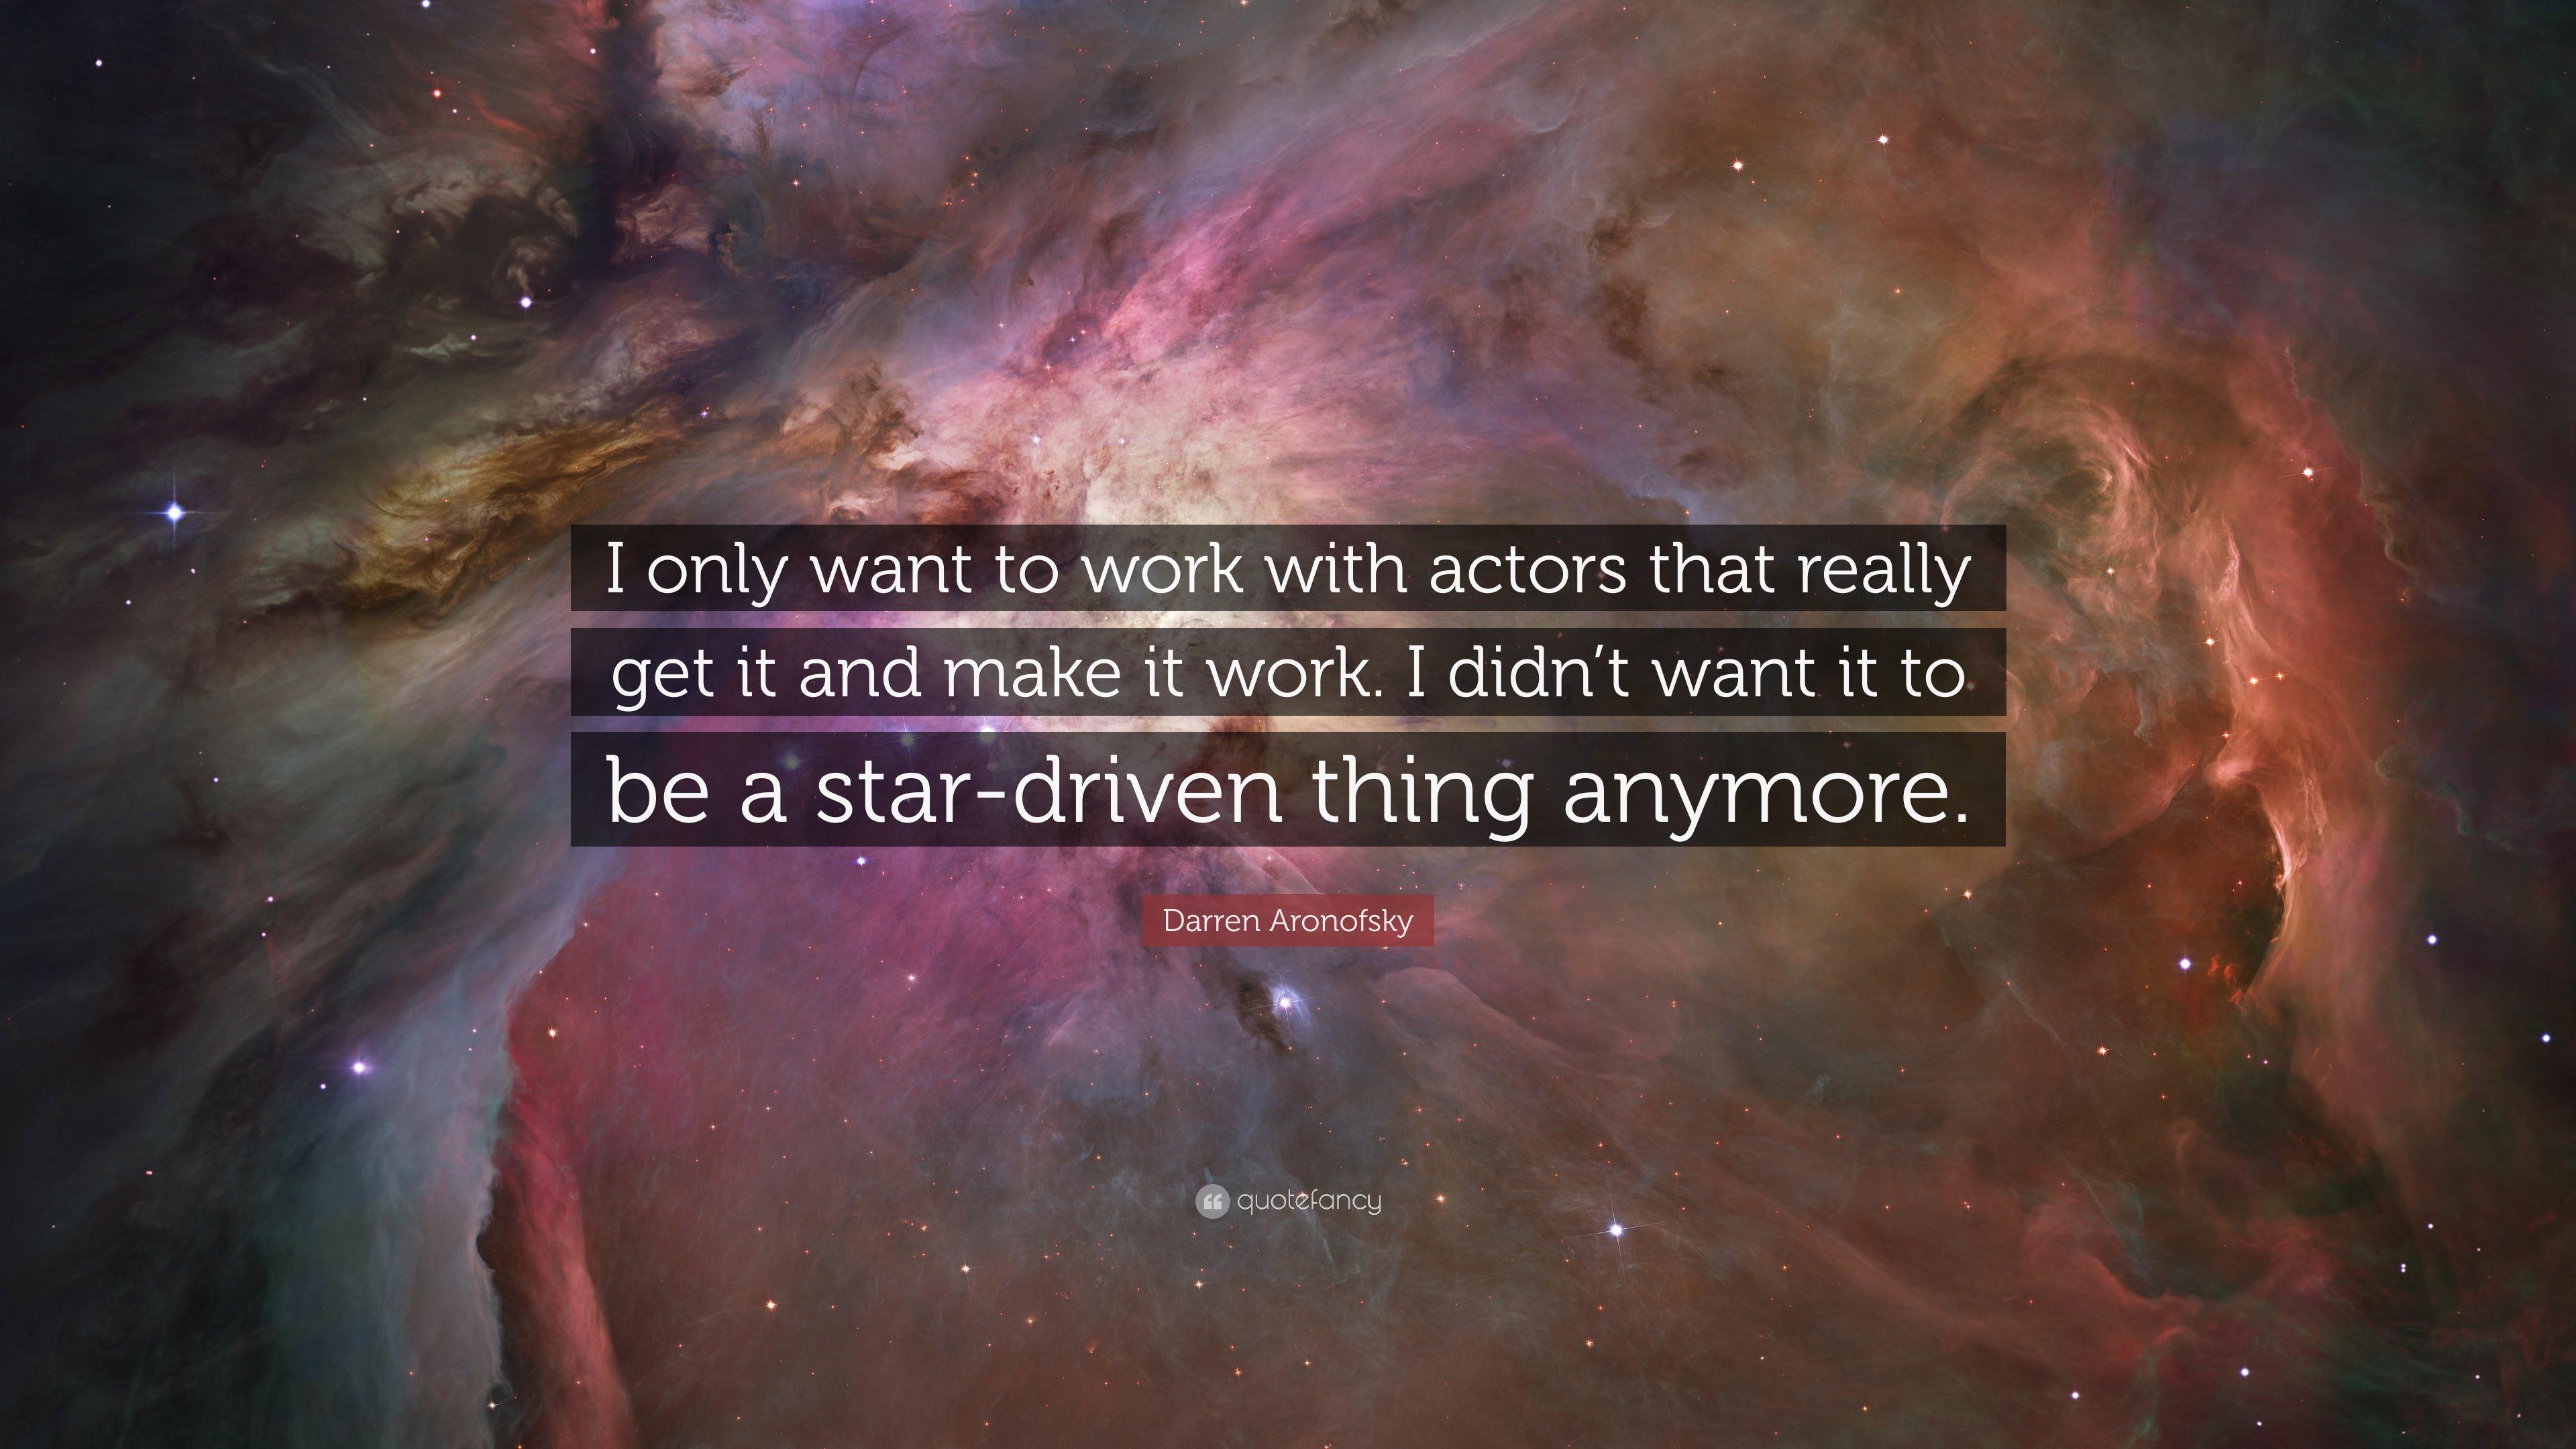 Darren Aronofsky Quote: “I only want to work with actors that